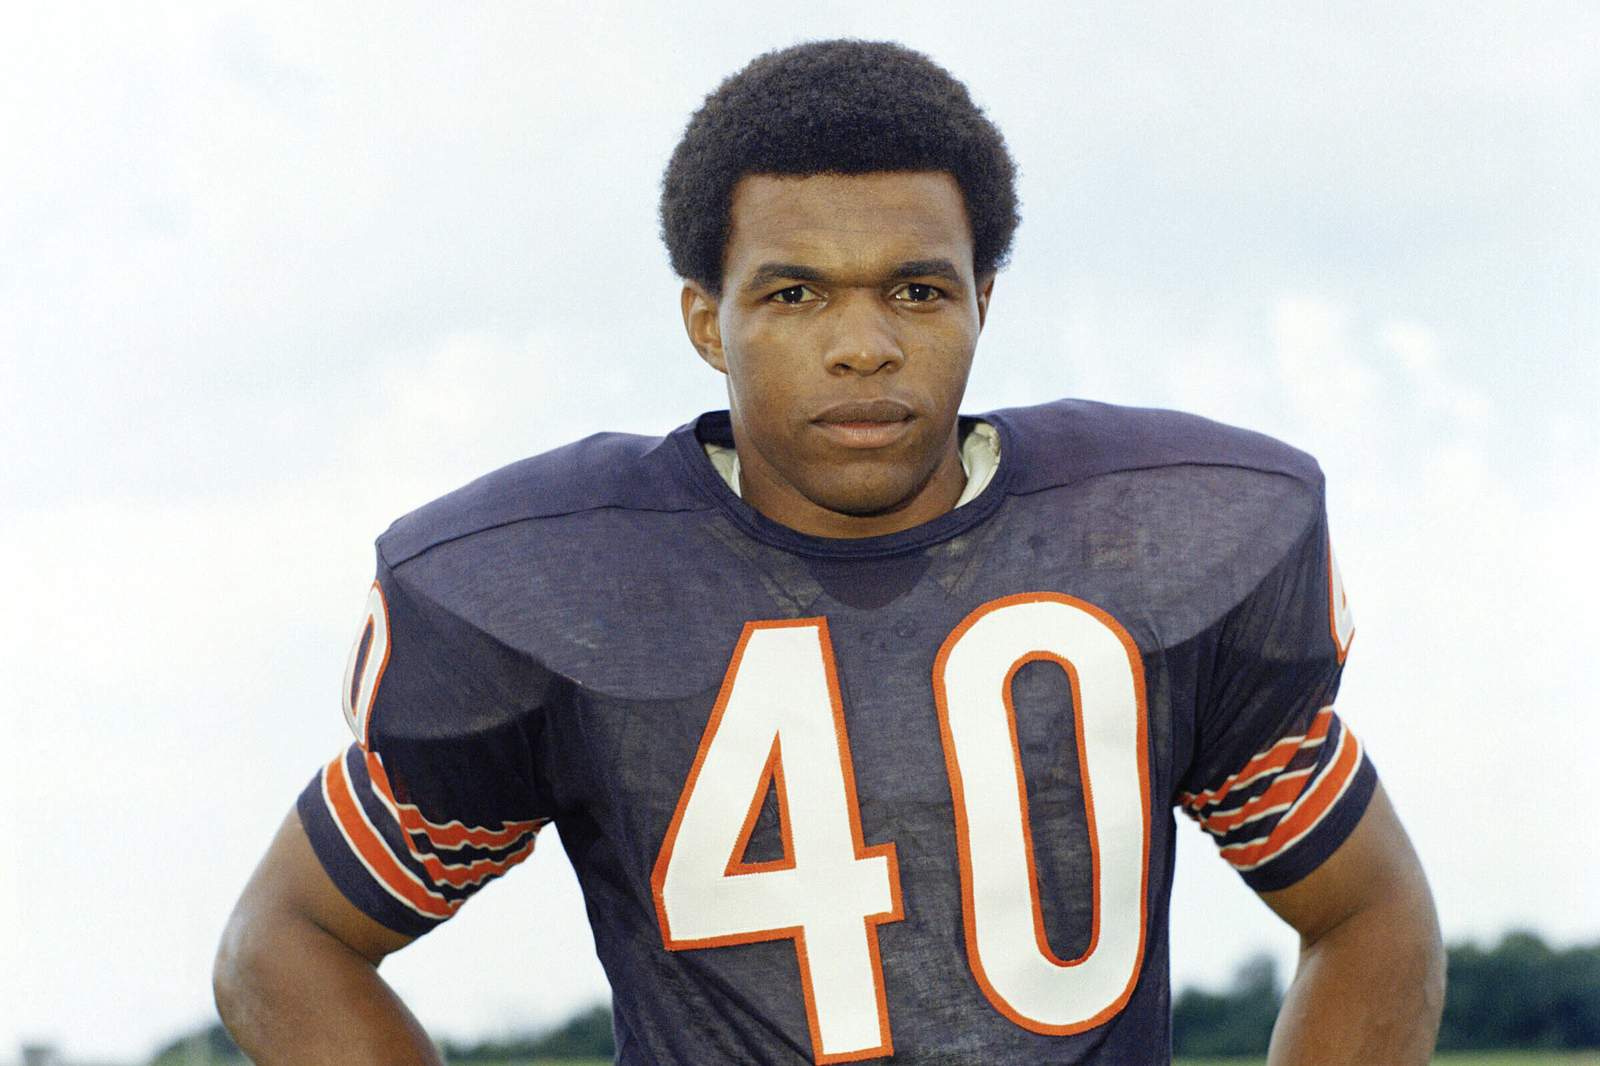 Gale Sayers, Bears Hall of Fame running back who inspired the movie ‘Brian’s Song’, dies at 77